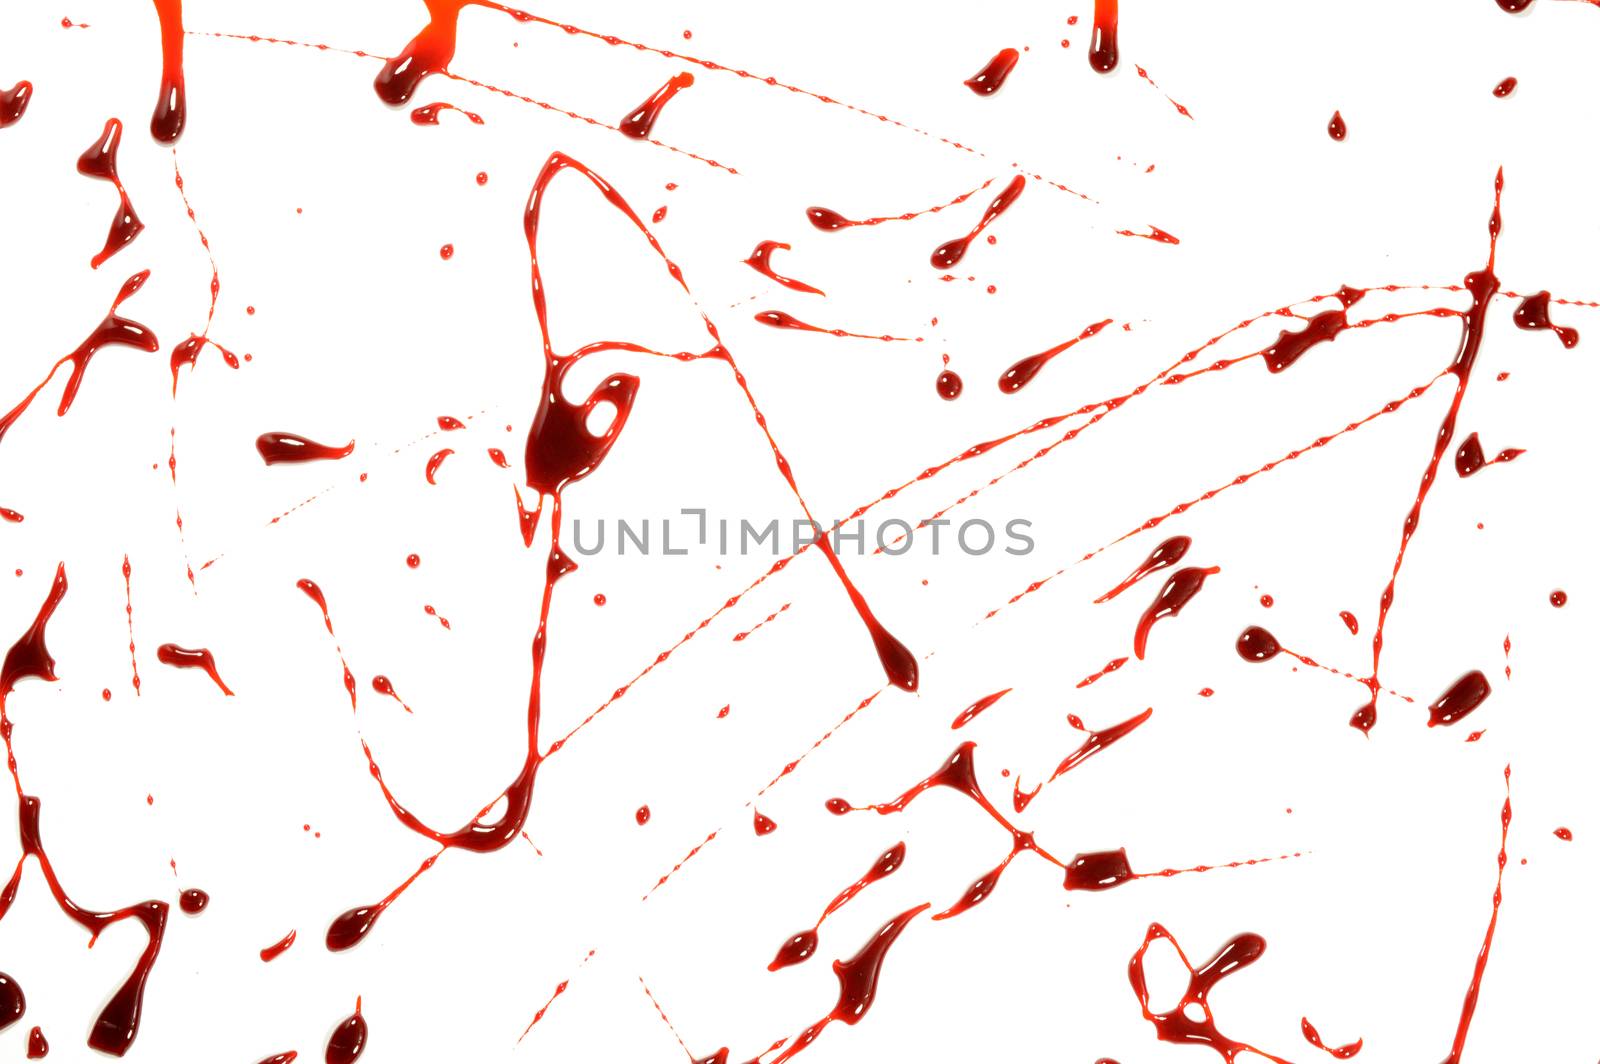 A closeup view of some fresh wet blood spatter over a white background.